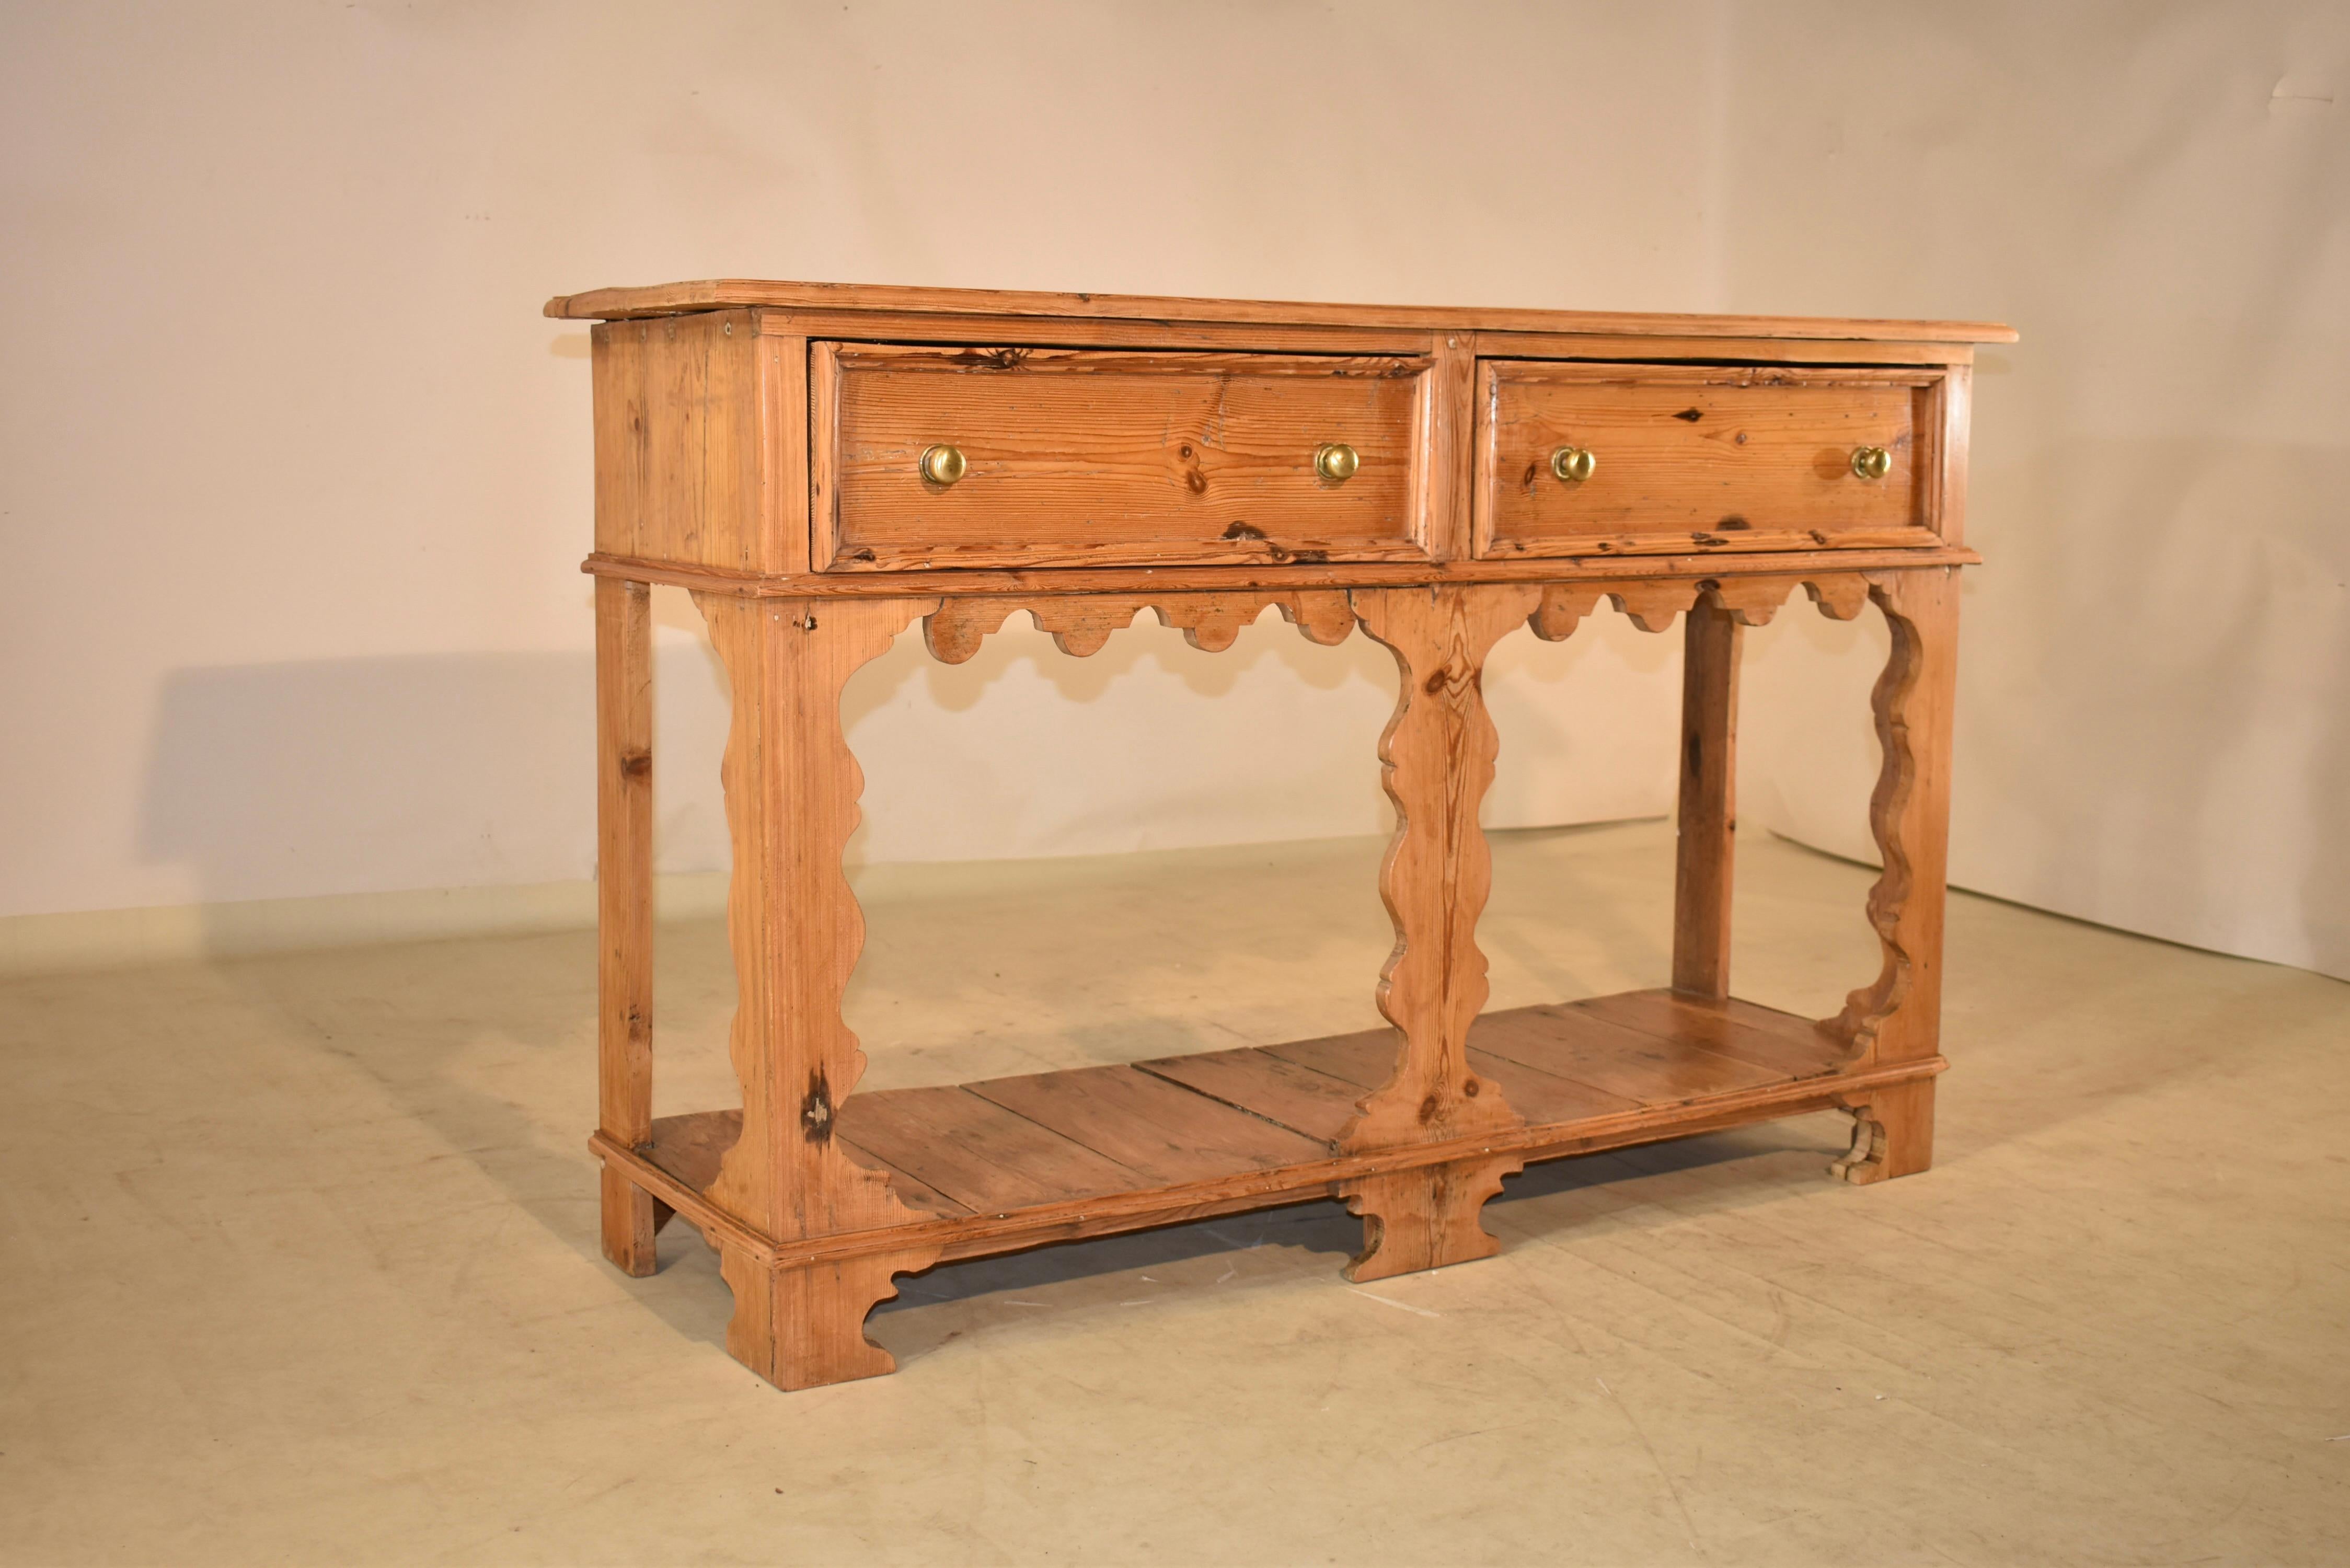 19th century pine sideboard from England with a gorgeous plank top, following down to simple sides and two molded drawers in the front, over a wonderfully hand scalloped apron. The front legs and apron are hand scalloped, for lovely cottage design